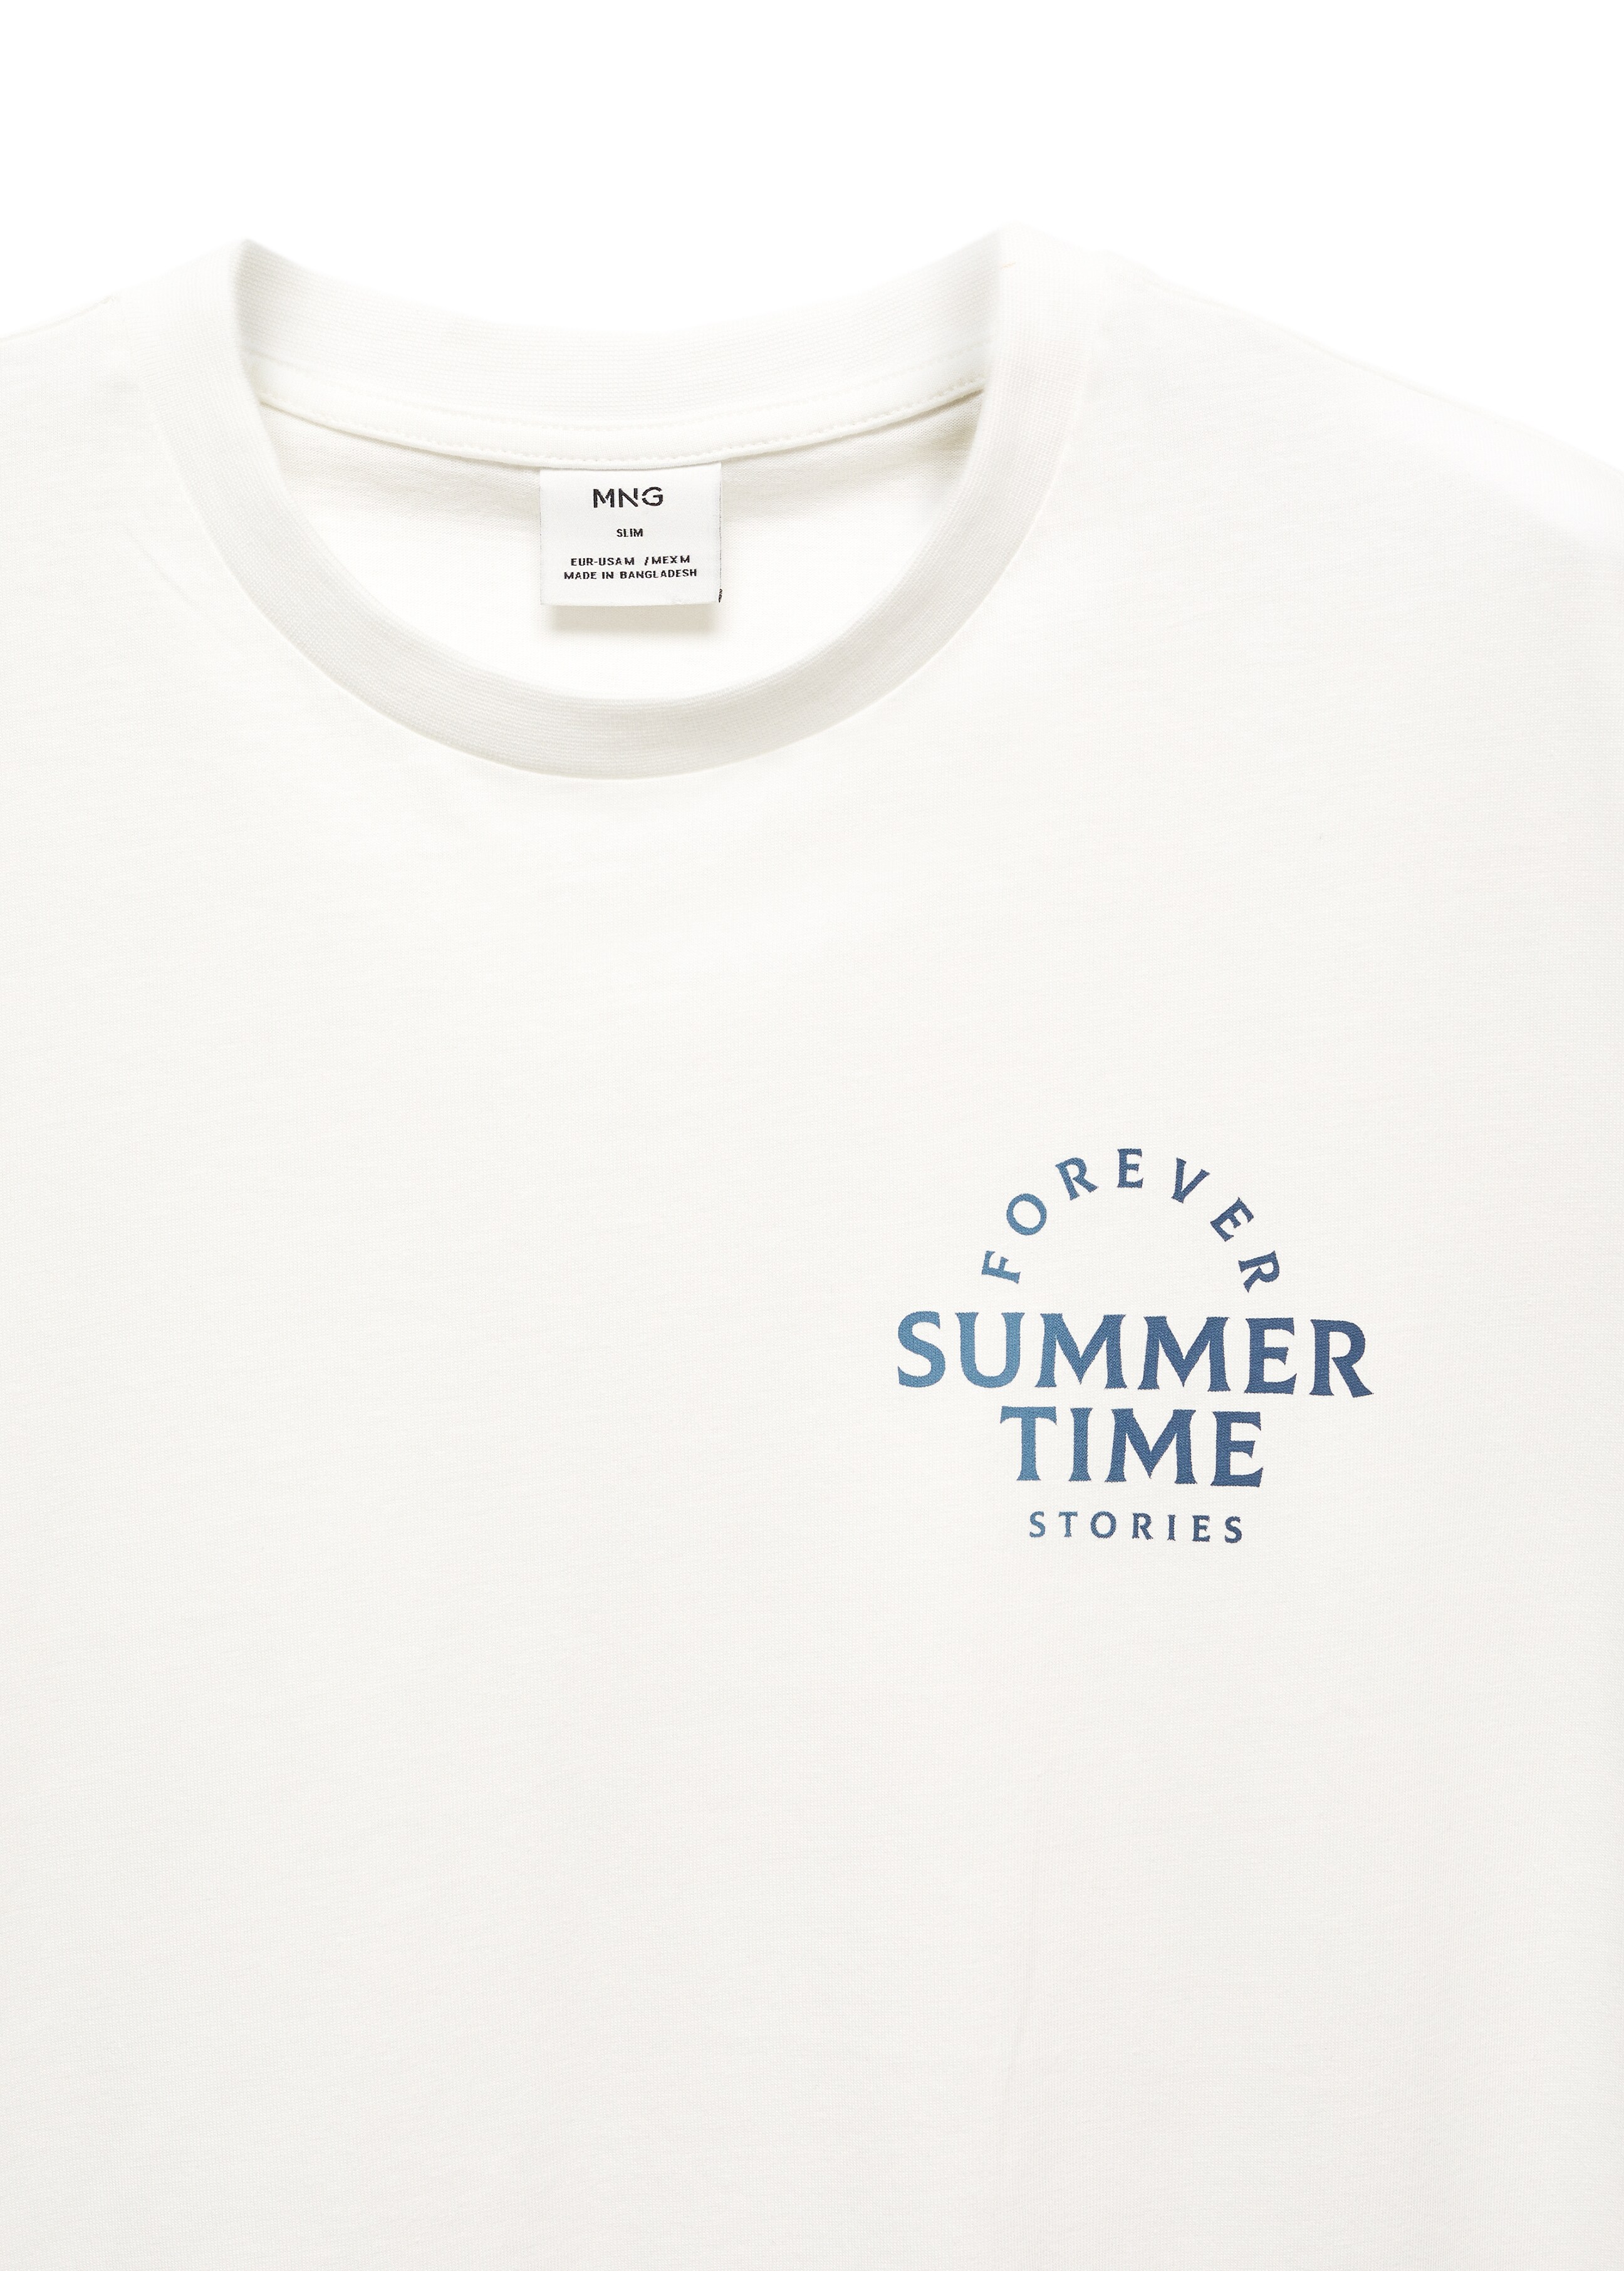 100% cotton printed t-shirt - Details of the article 8